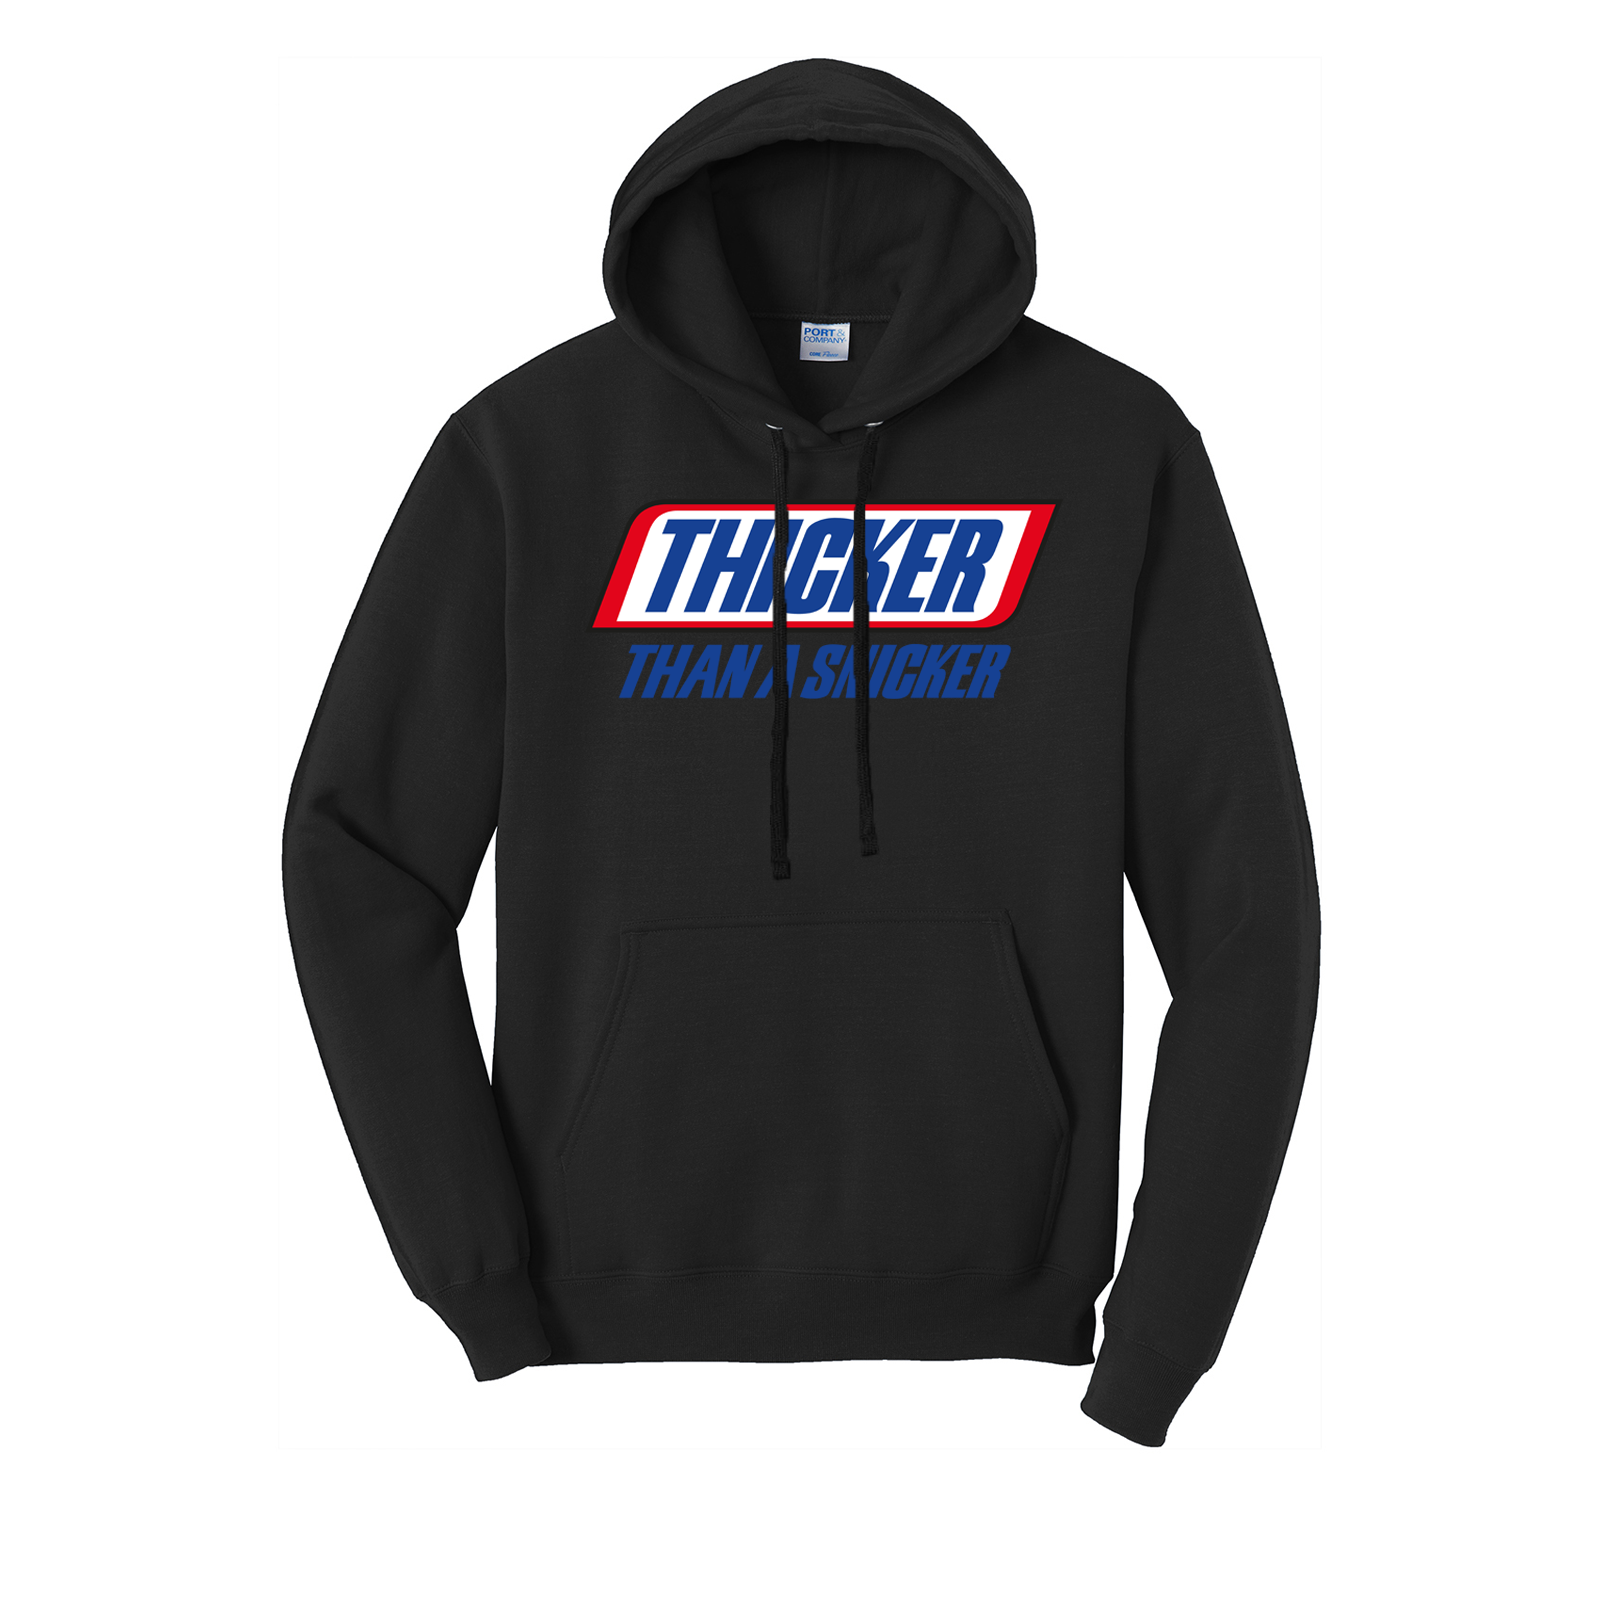 'Thicker Than A Snicker' Men's Hoodie